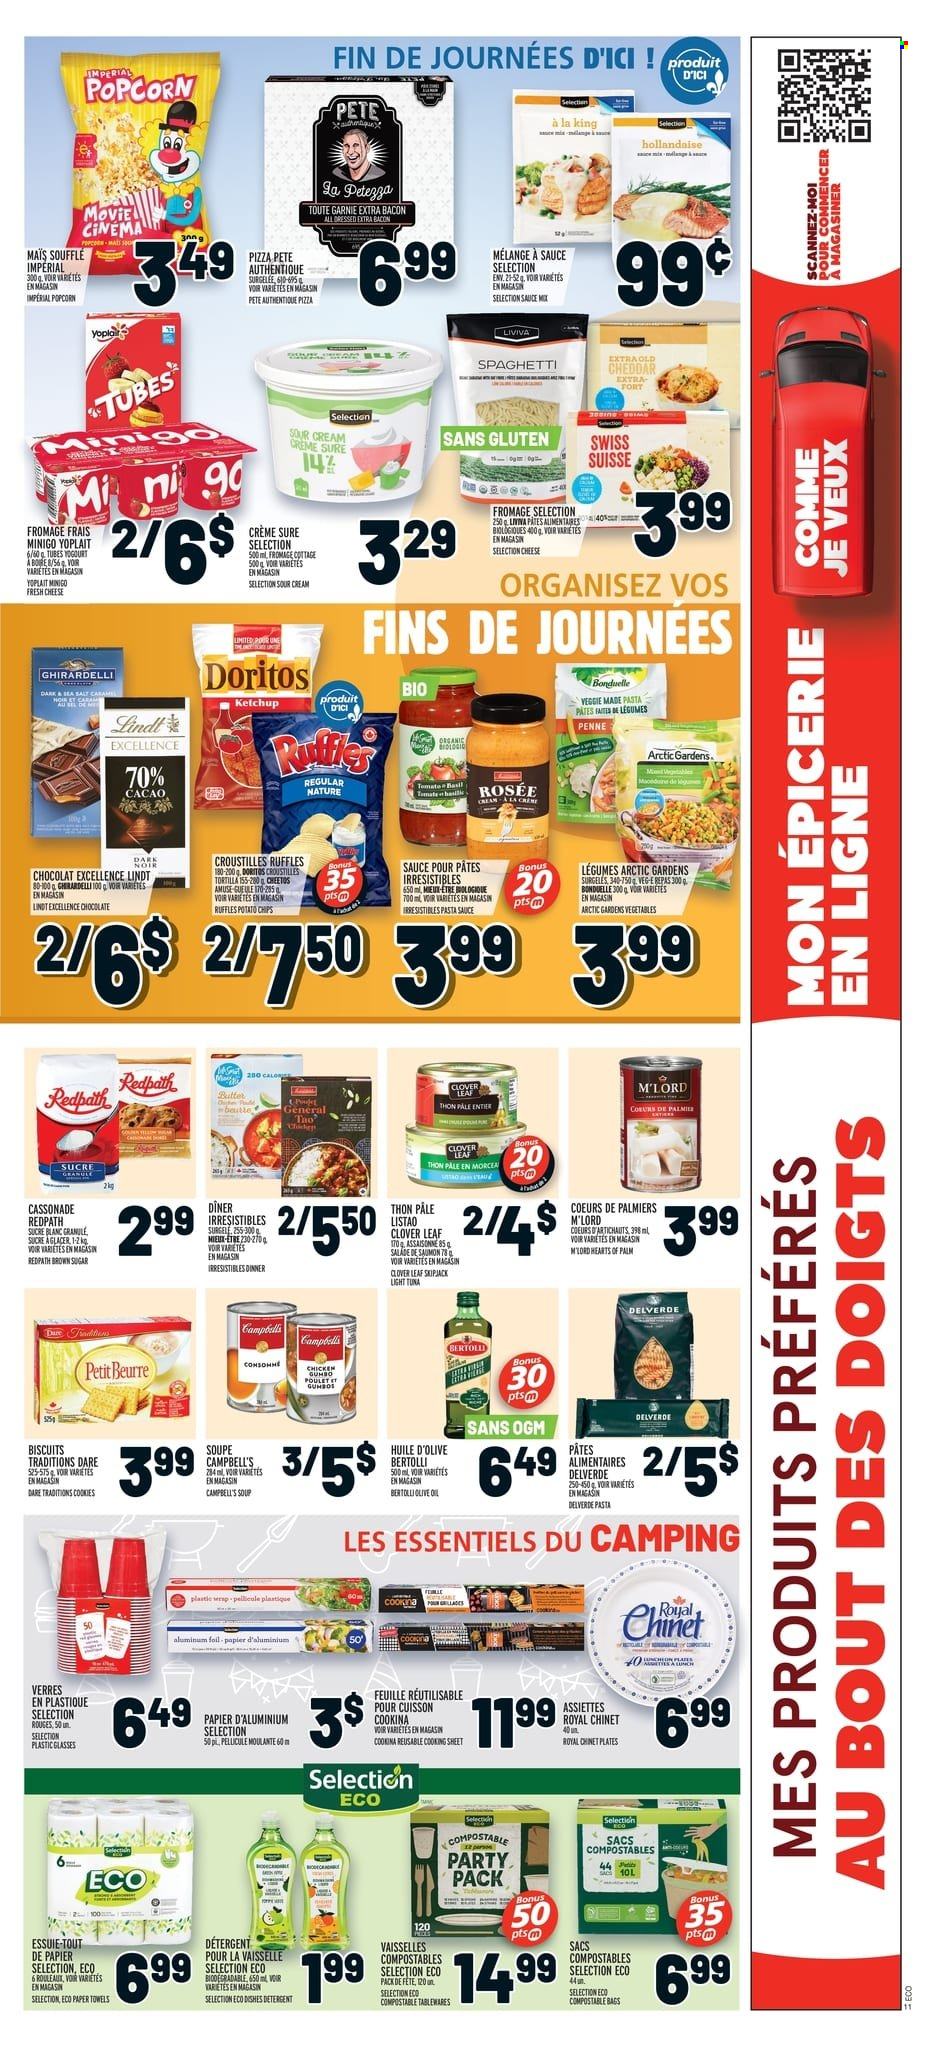 thumbnail - Metro Flyer - May 19, 2022 - May 25, 2022 - Sales products - tortillas, tuna, Campbell's, spaghetti, pizza, pasta sauce, soup, sauce, Bertolli, bacon, Clover, Yoplait, butter, sour cream, cookies, chocolate, biscuit, Ghirardelli, Doritos, potato chips, Cheetos, chips, popcorn, Ruffles, cane sugar, light tuna, penne, olive oil, kitchen towels, paper towels, Sure, bag, plate, aluminium foil, detergent, ketchup, Lindt. Page 13.